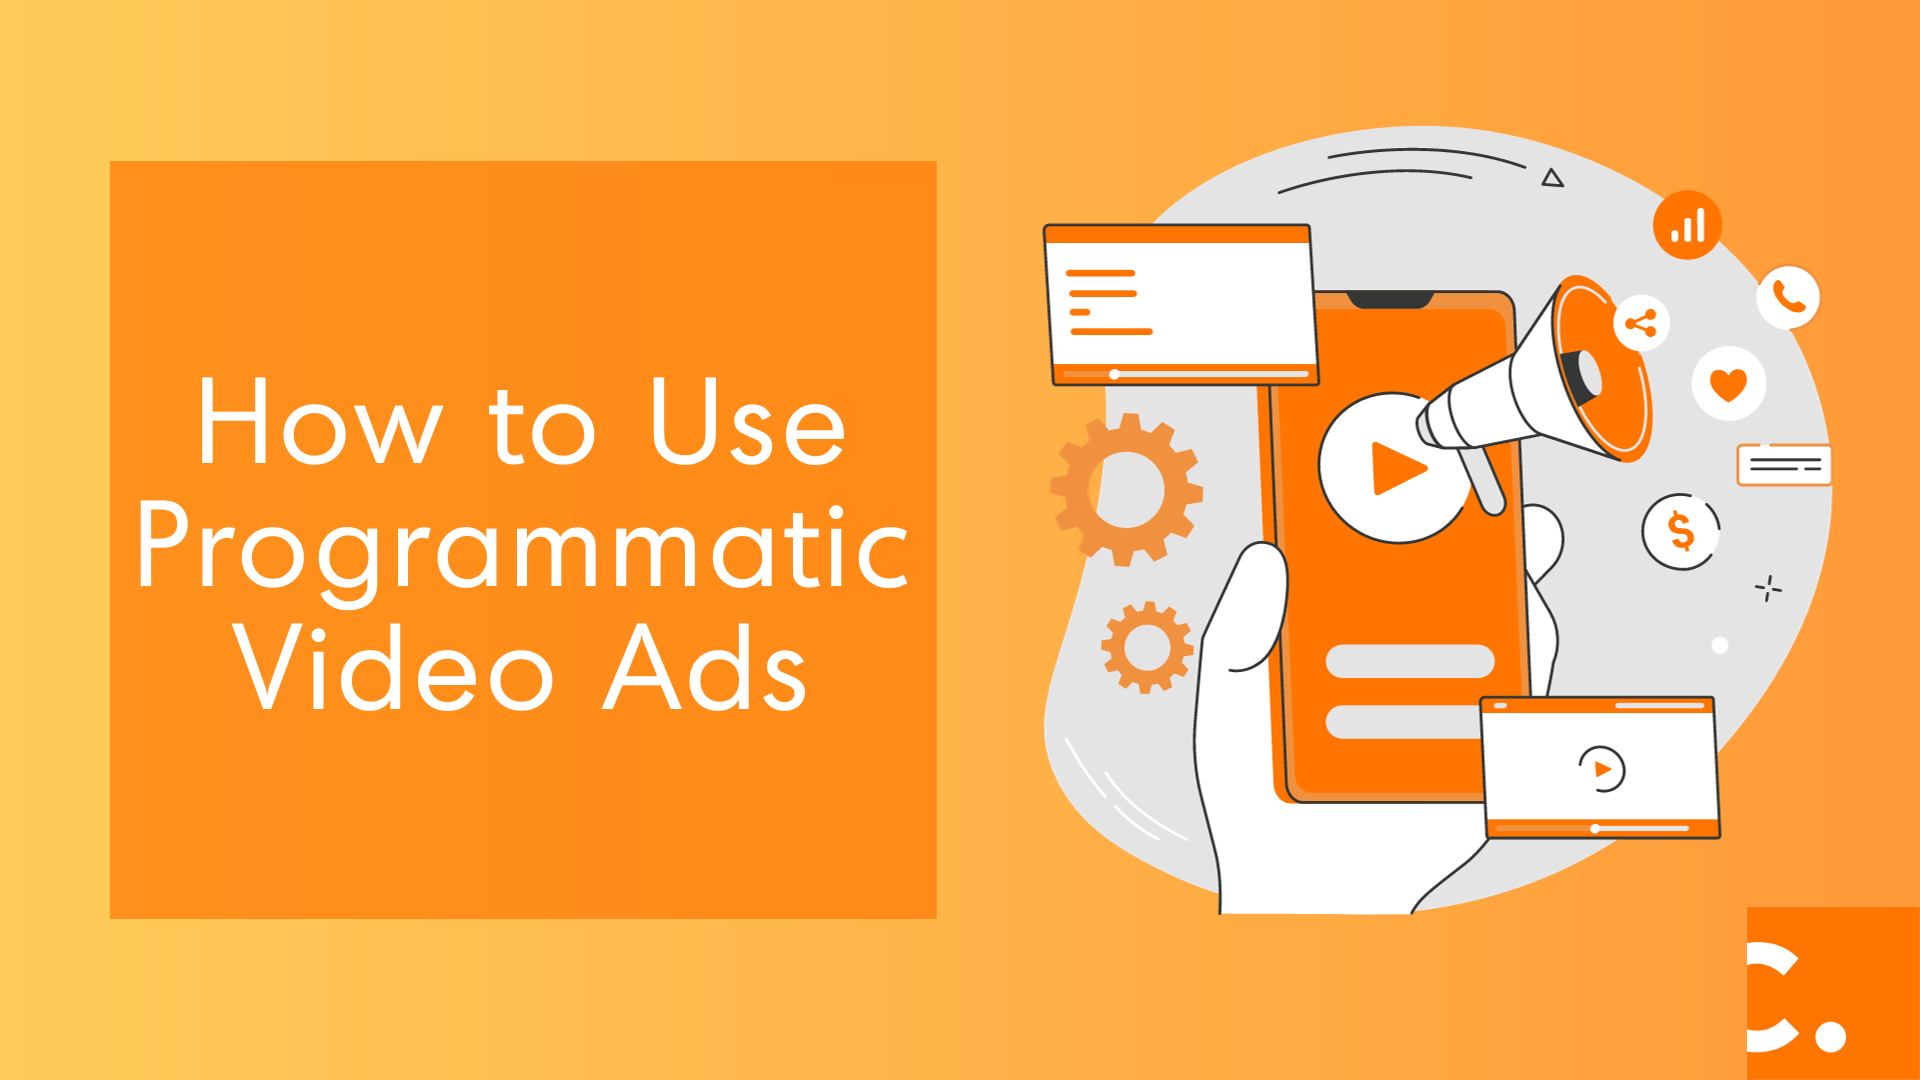 How to Use Programmatic Video Ads